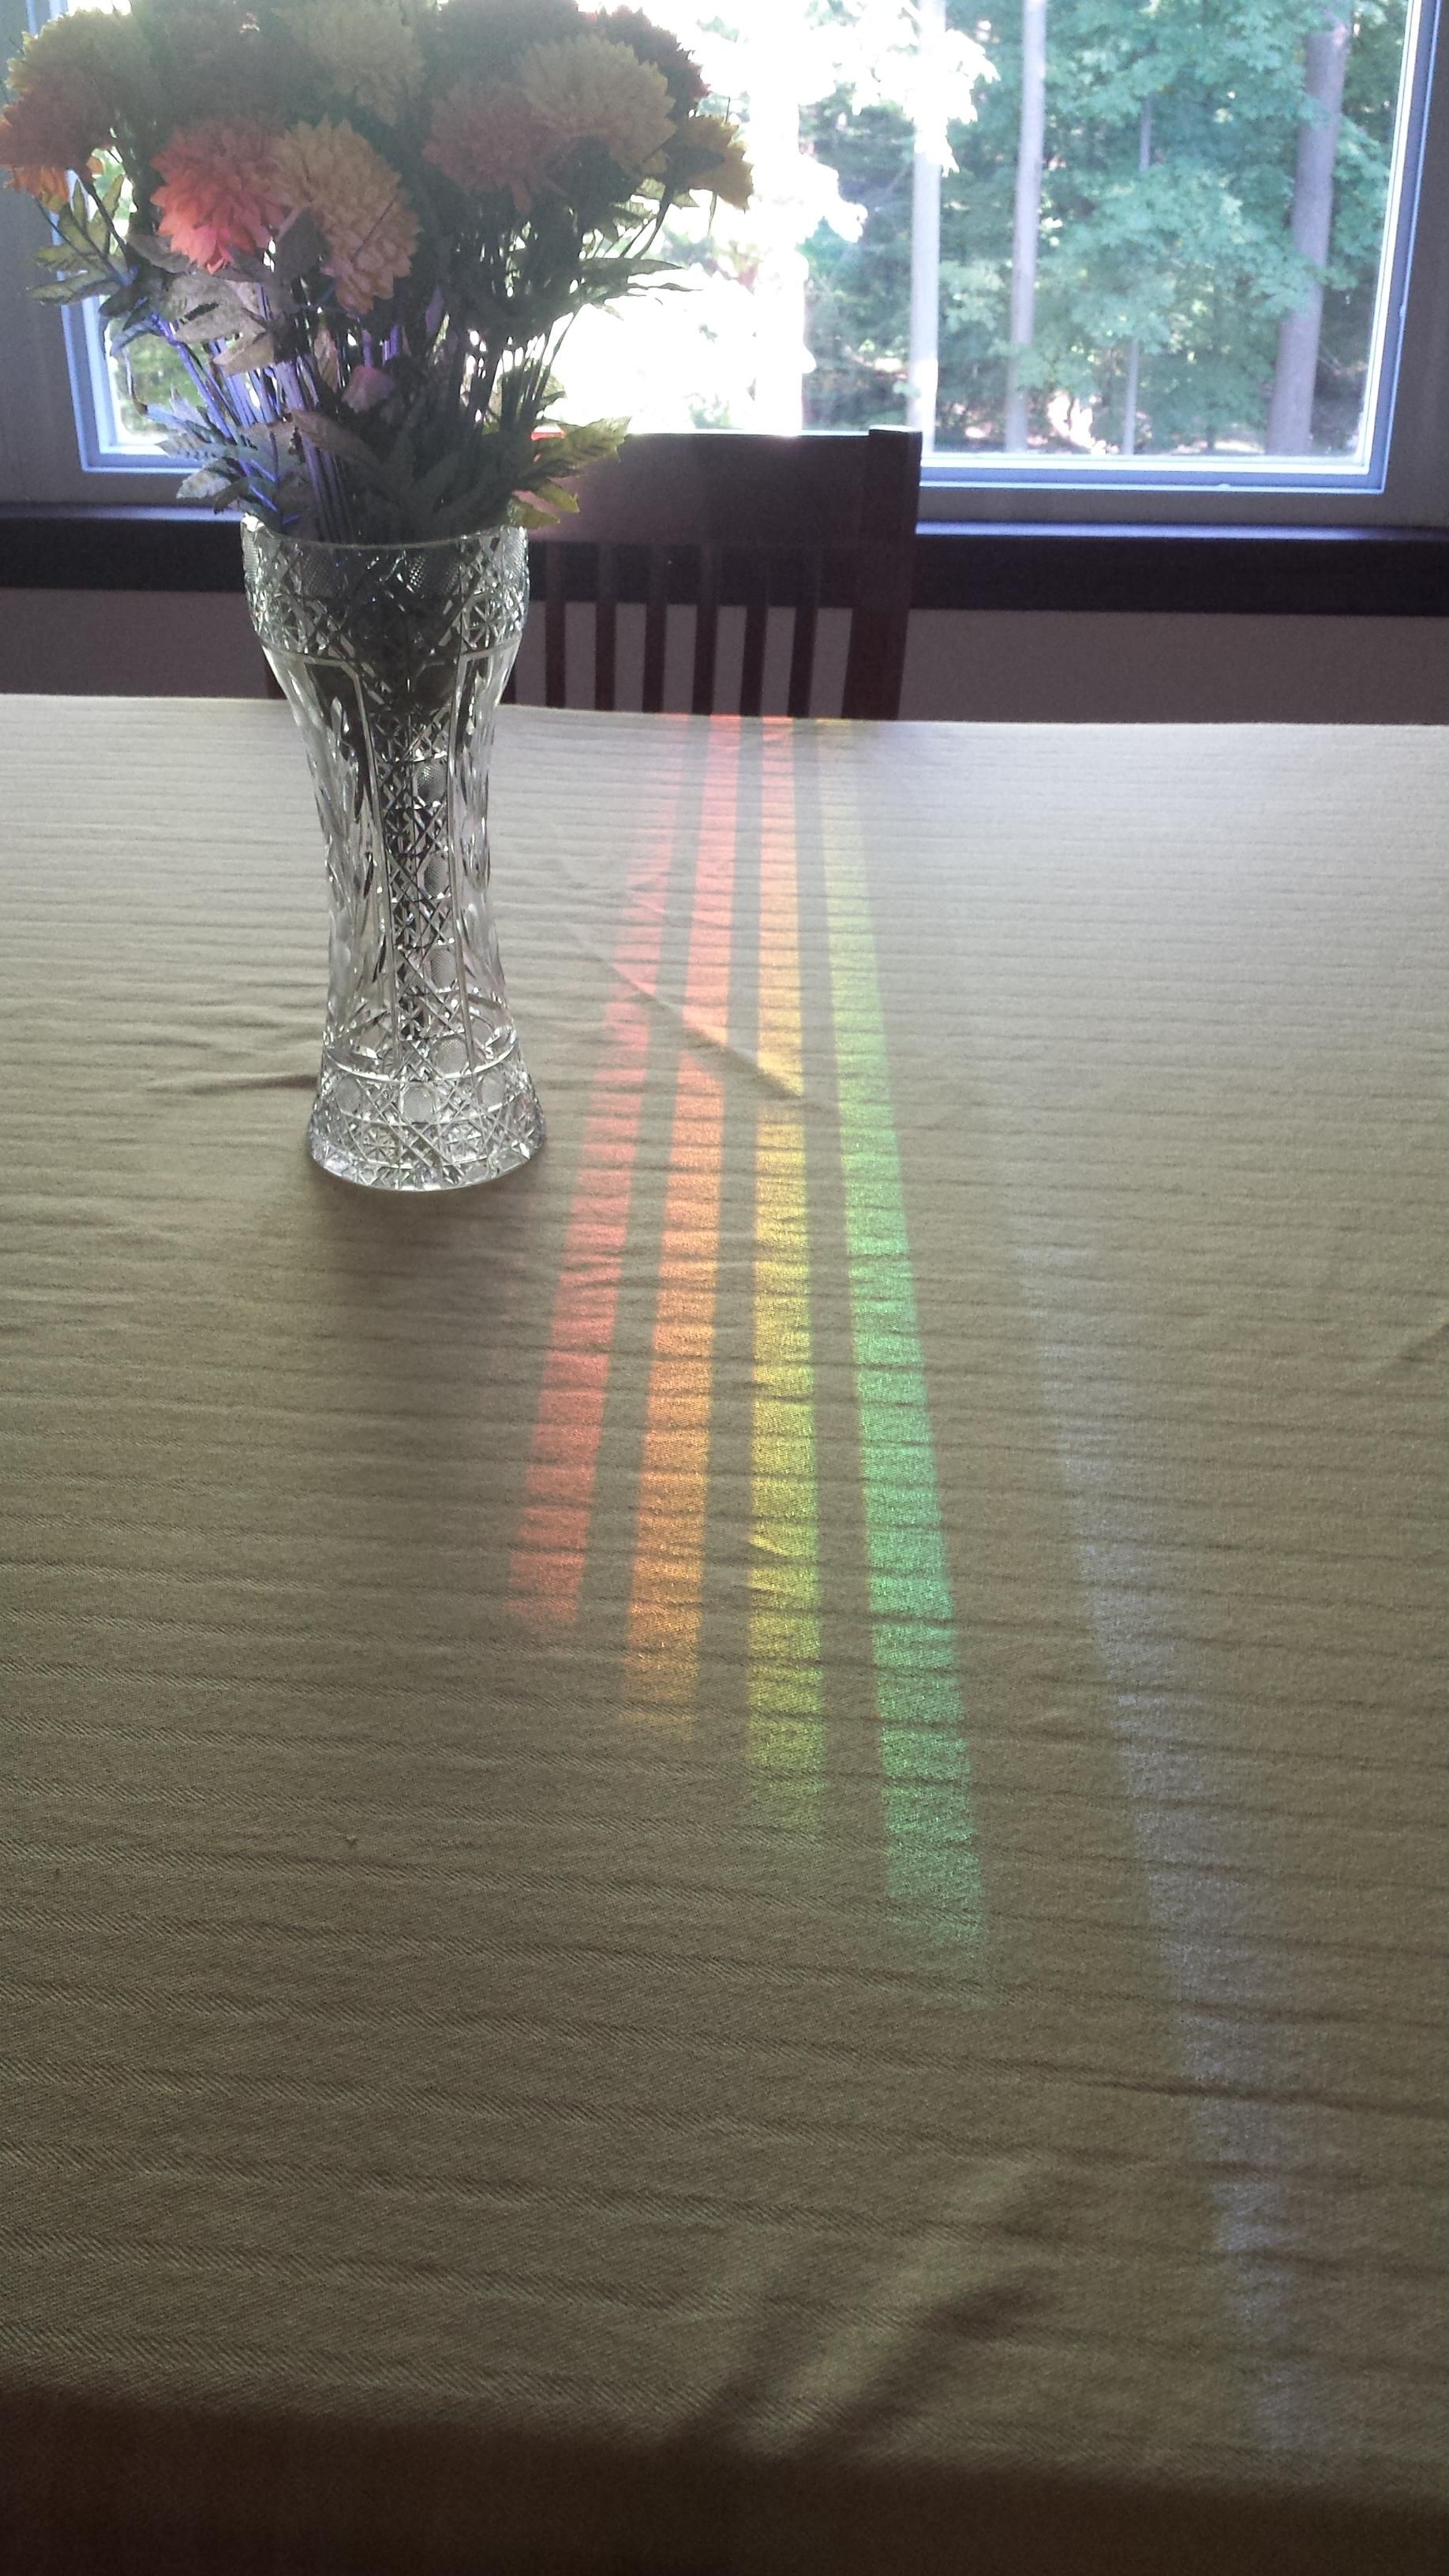 This spectrum reflected off the dining room window through a chair back.